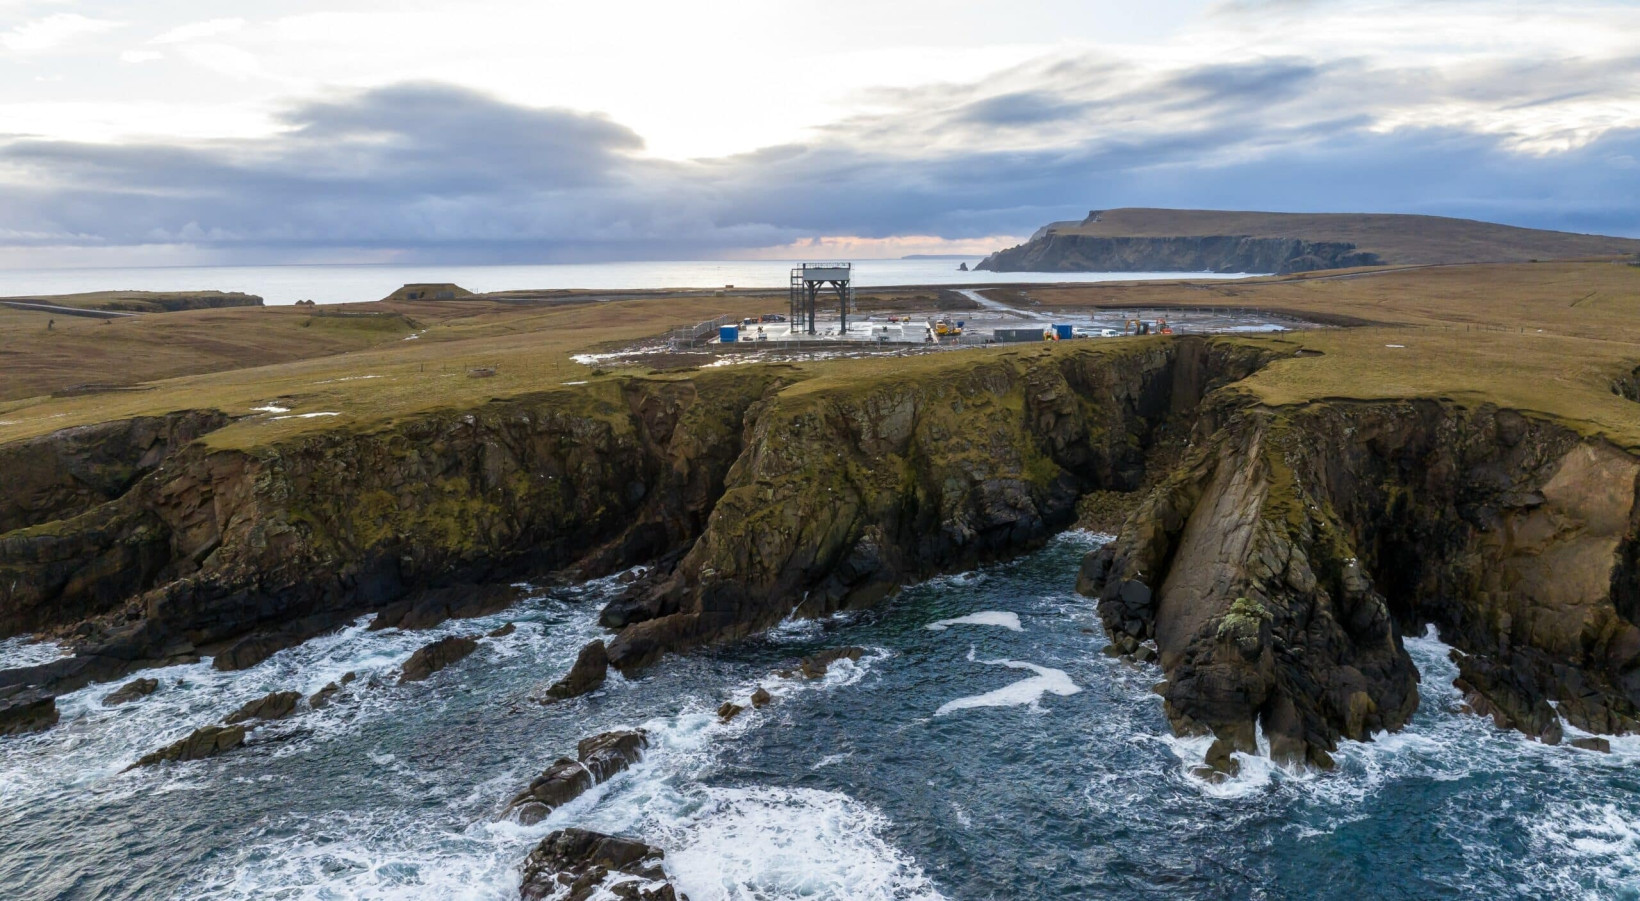 An image of the SaxaVord Spaceport under construction in Shetland 